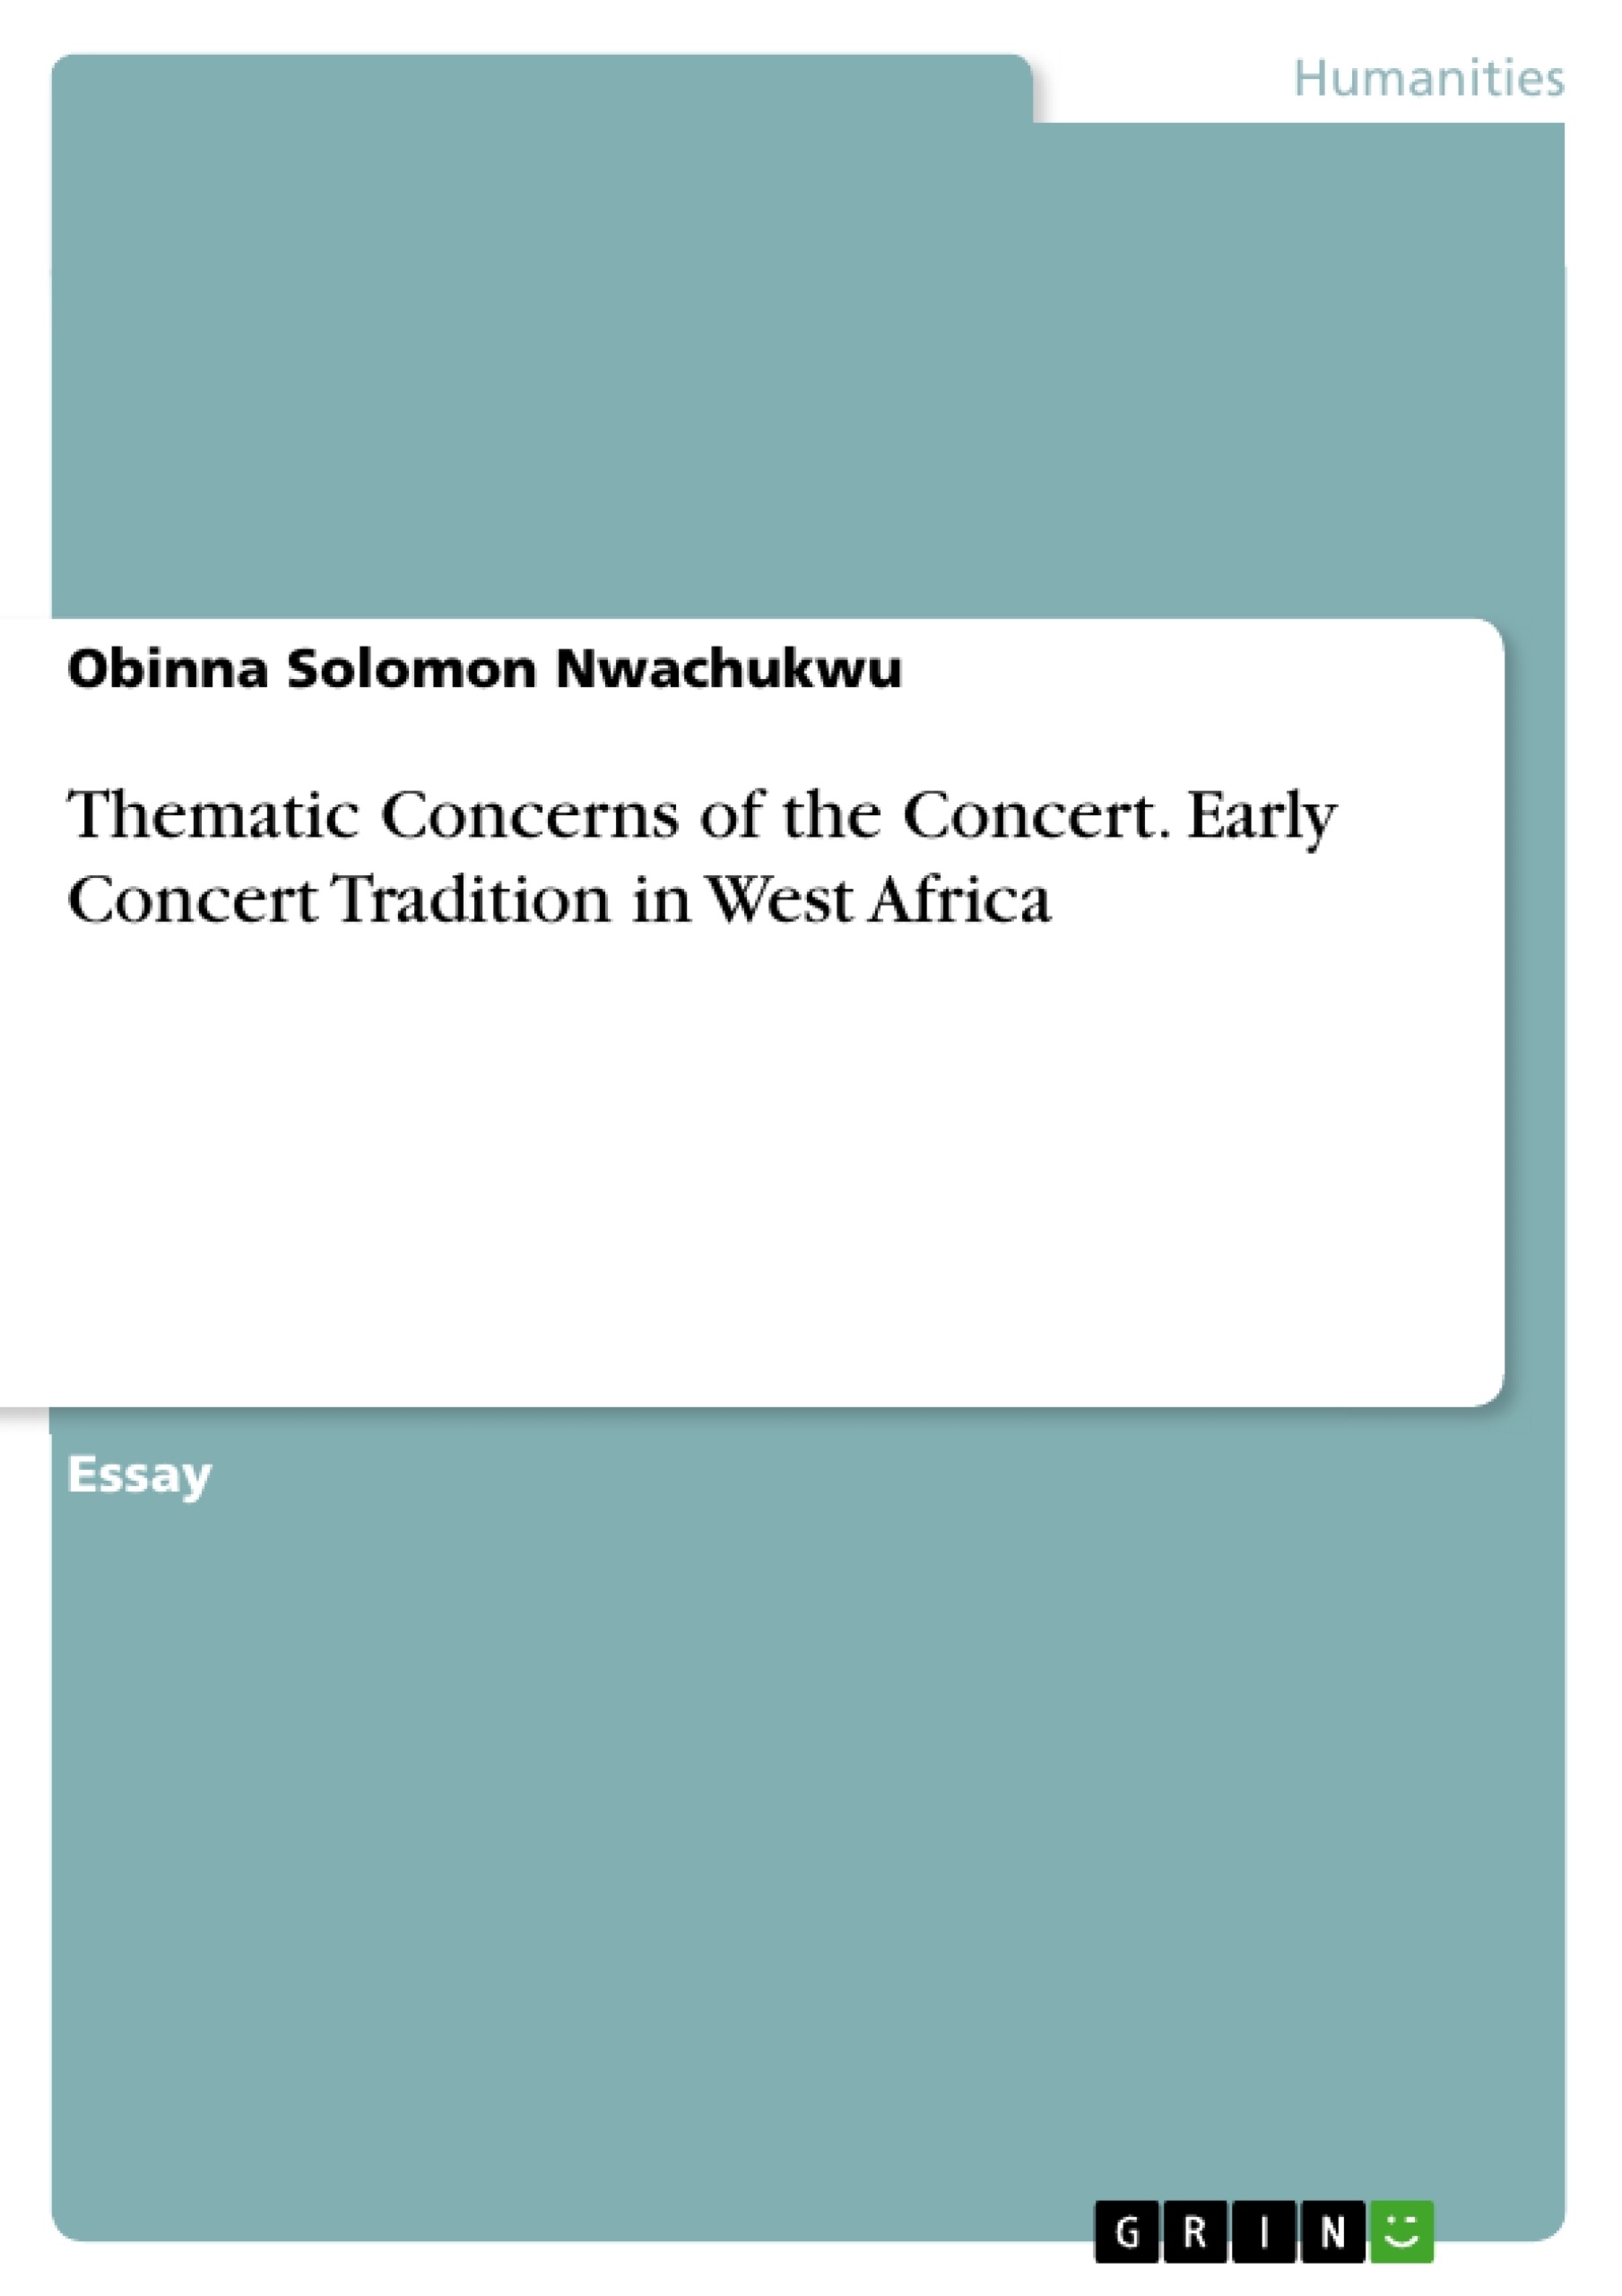 Titre: Thematic Concerns of the Concert. Early Concert Tradition in West Africa